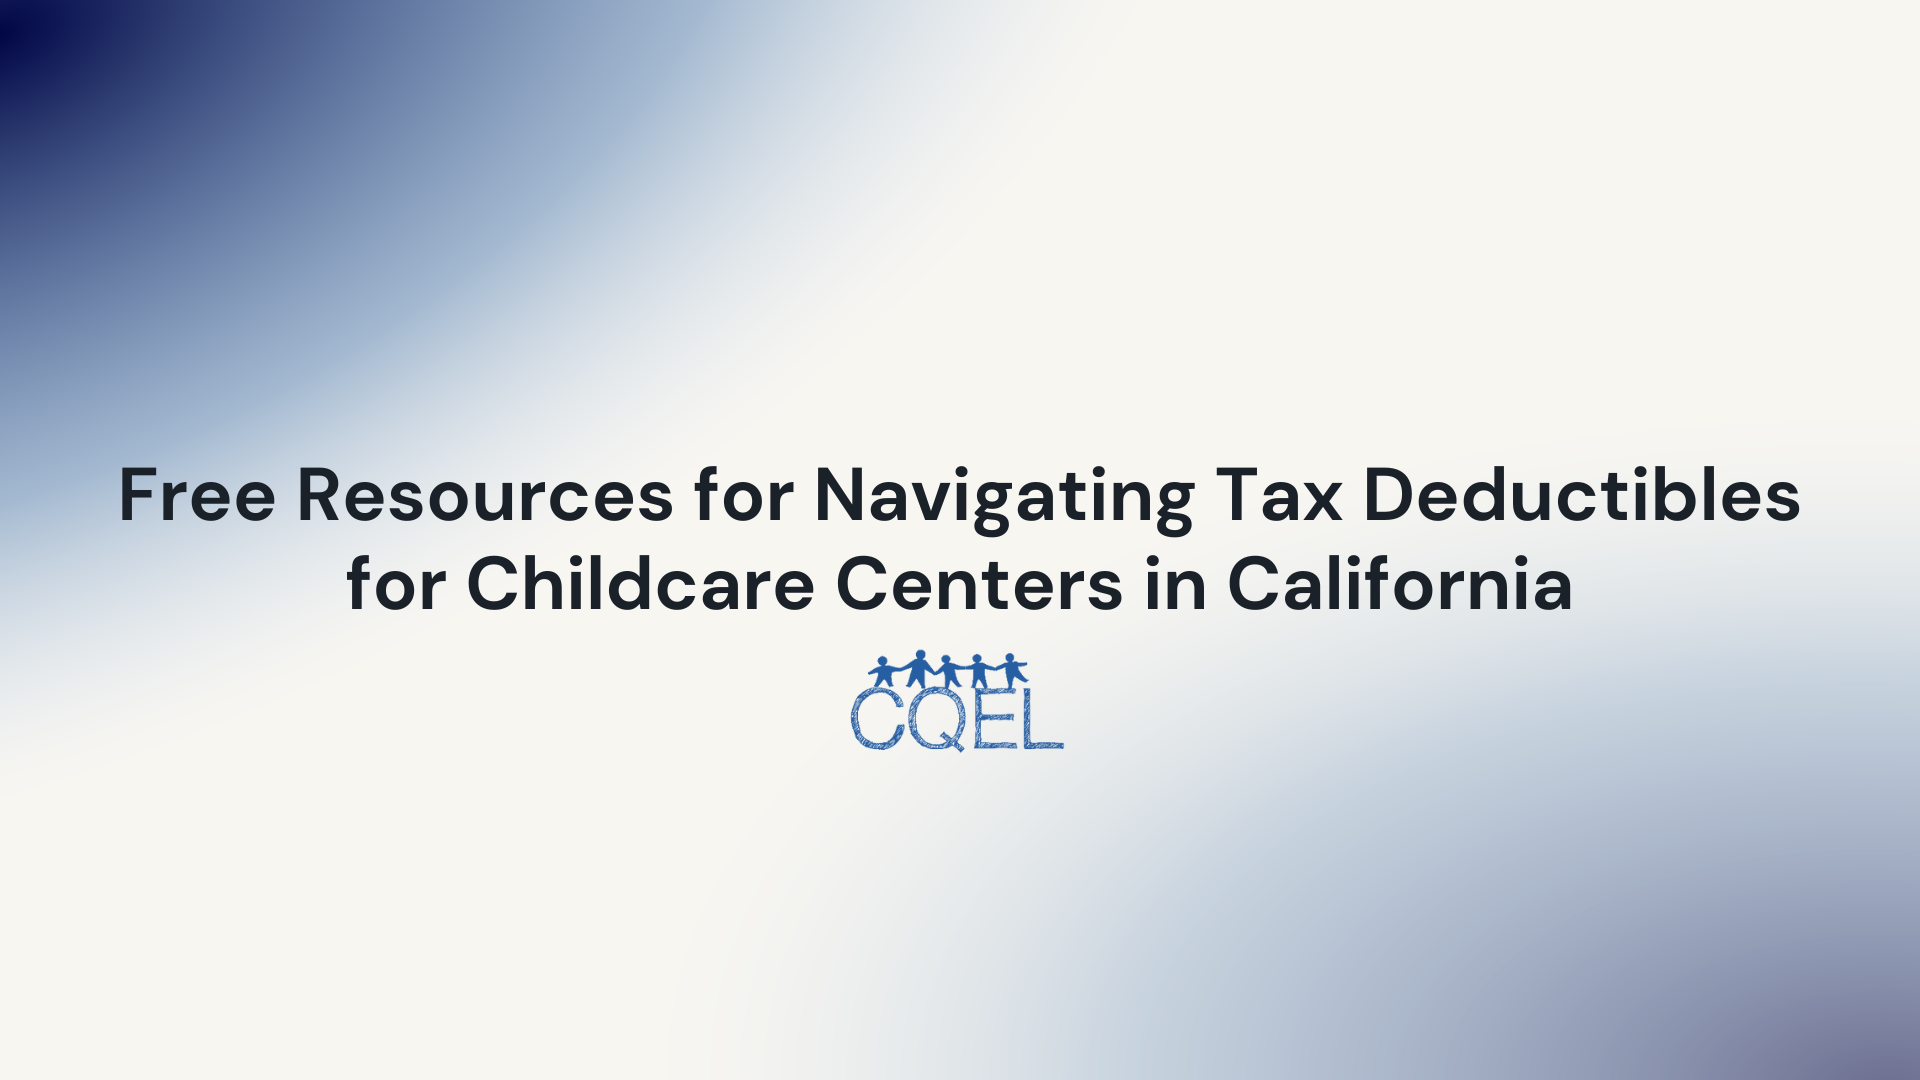 Free Resources for Navigating Tax Deductibles for Childcare Centers in California